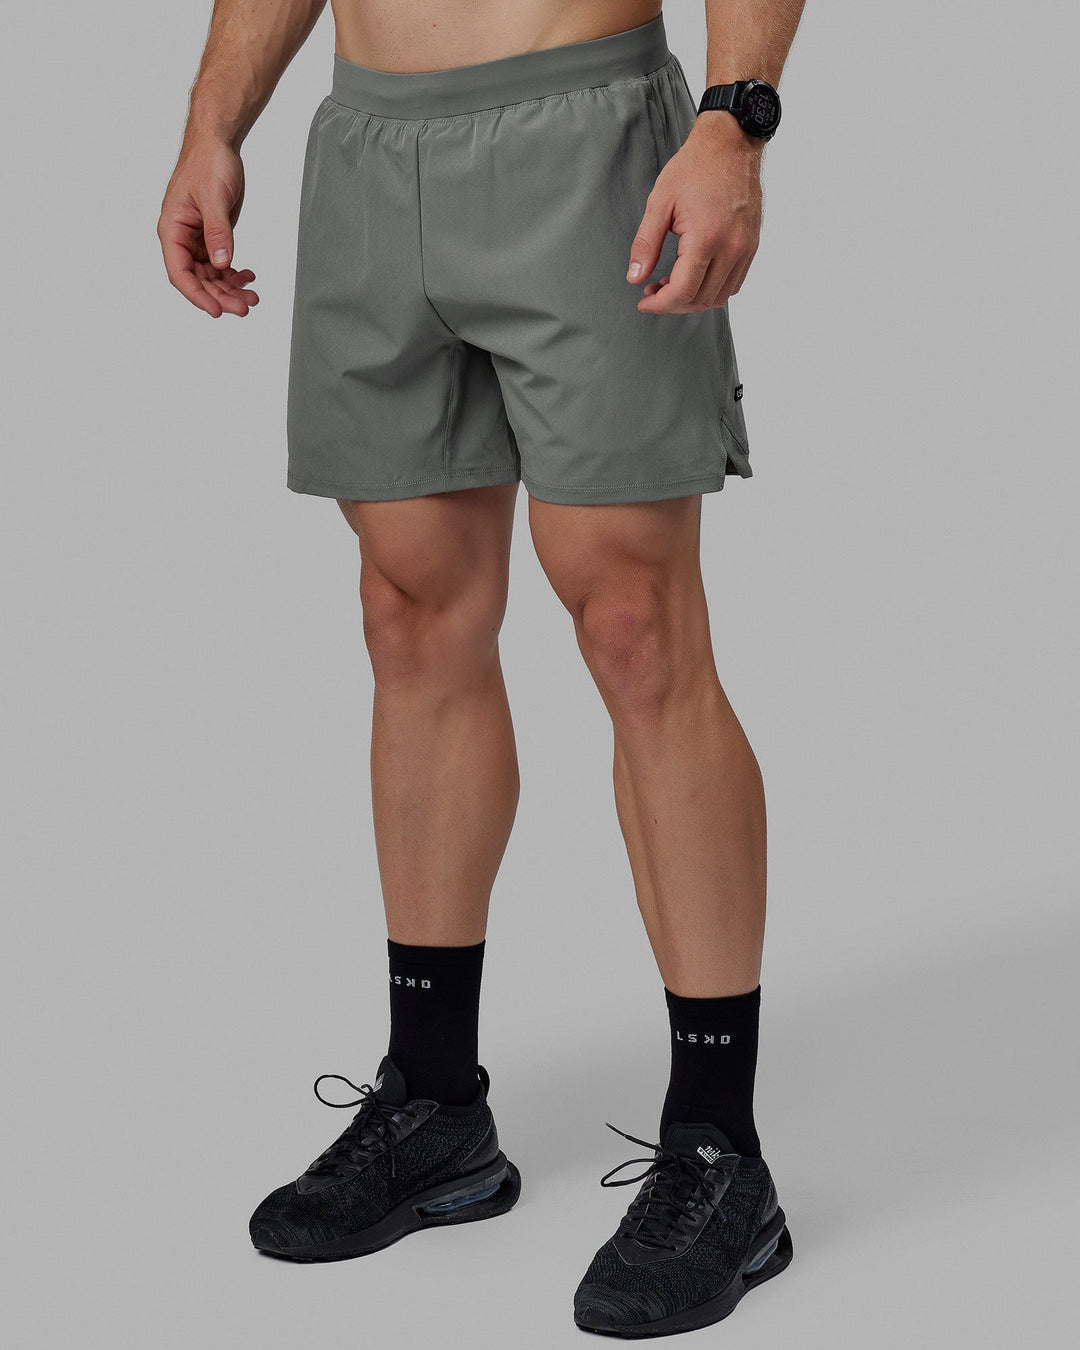 Man wearing Challenger 6" Lined Performance Short - Graphite